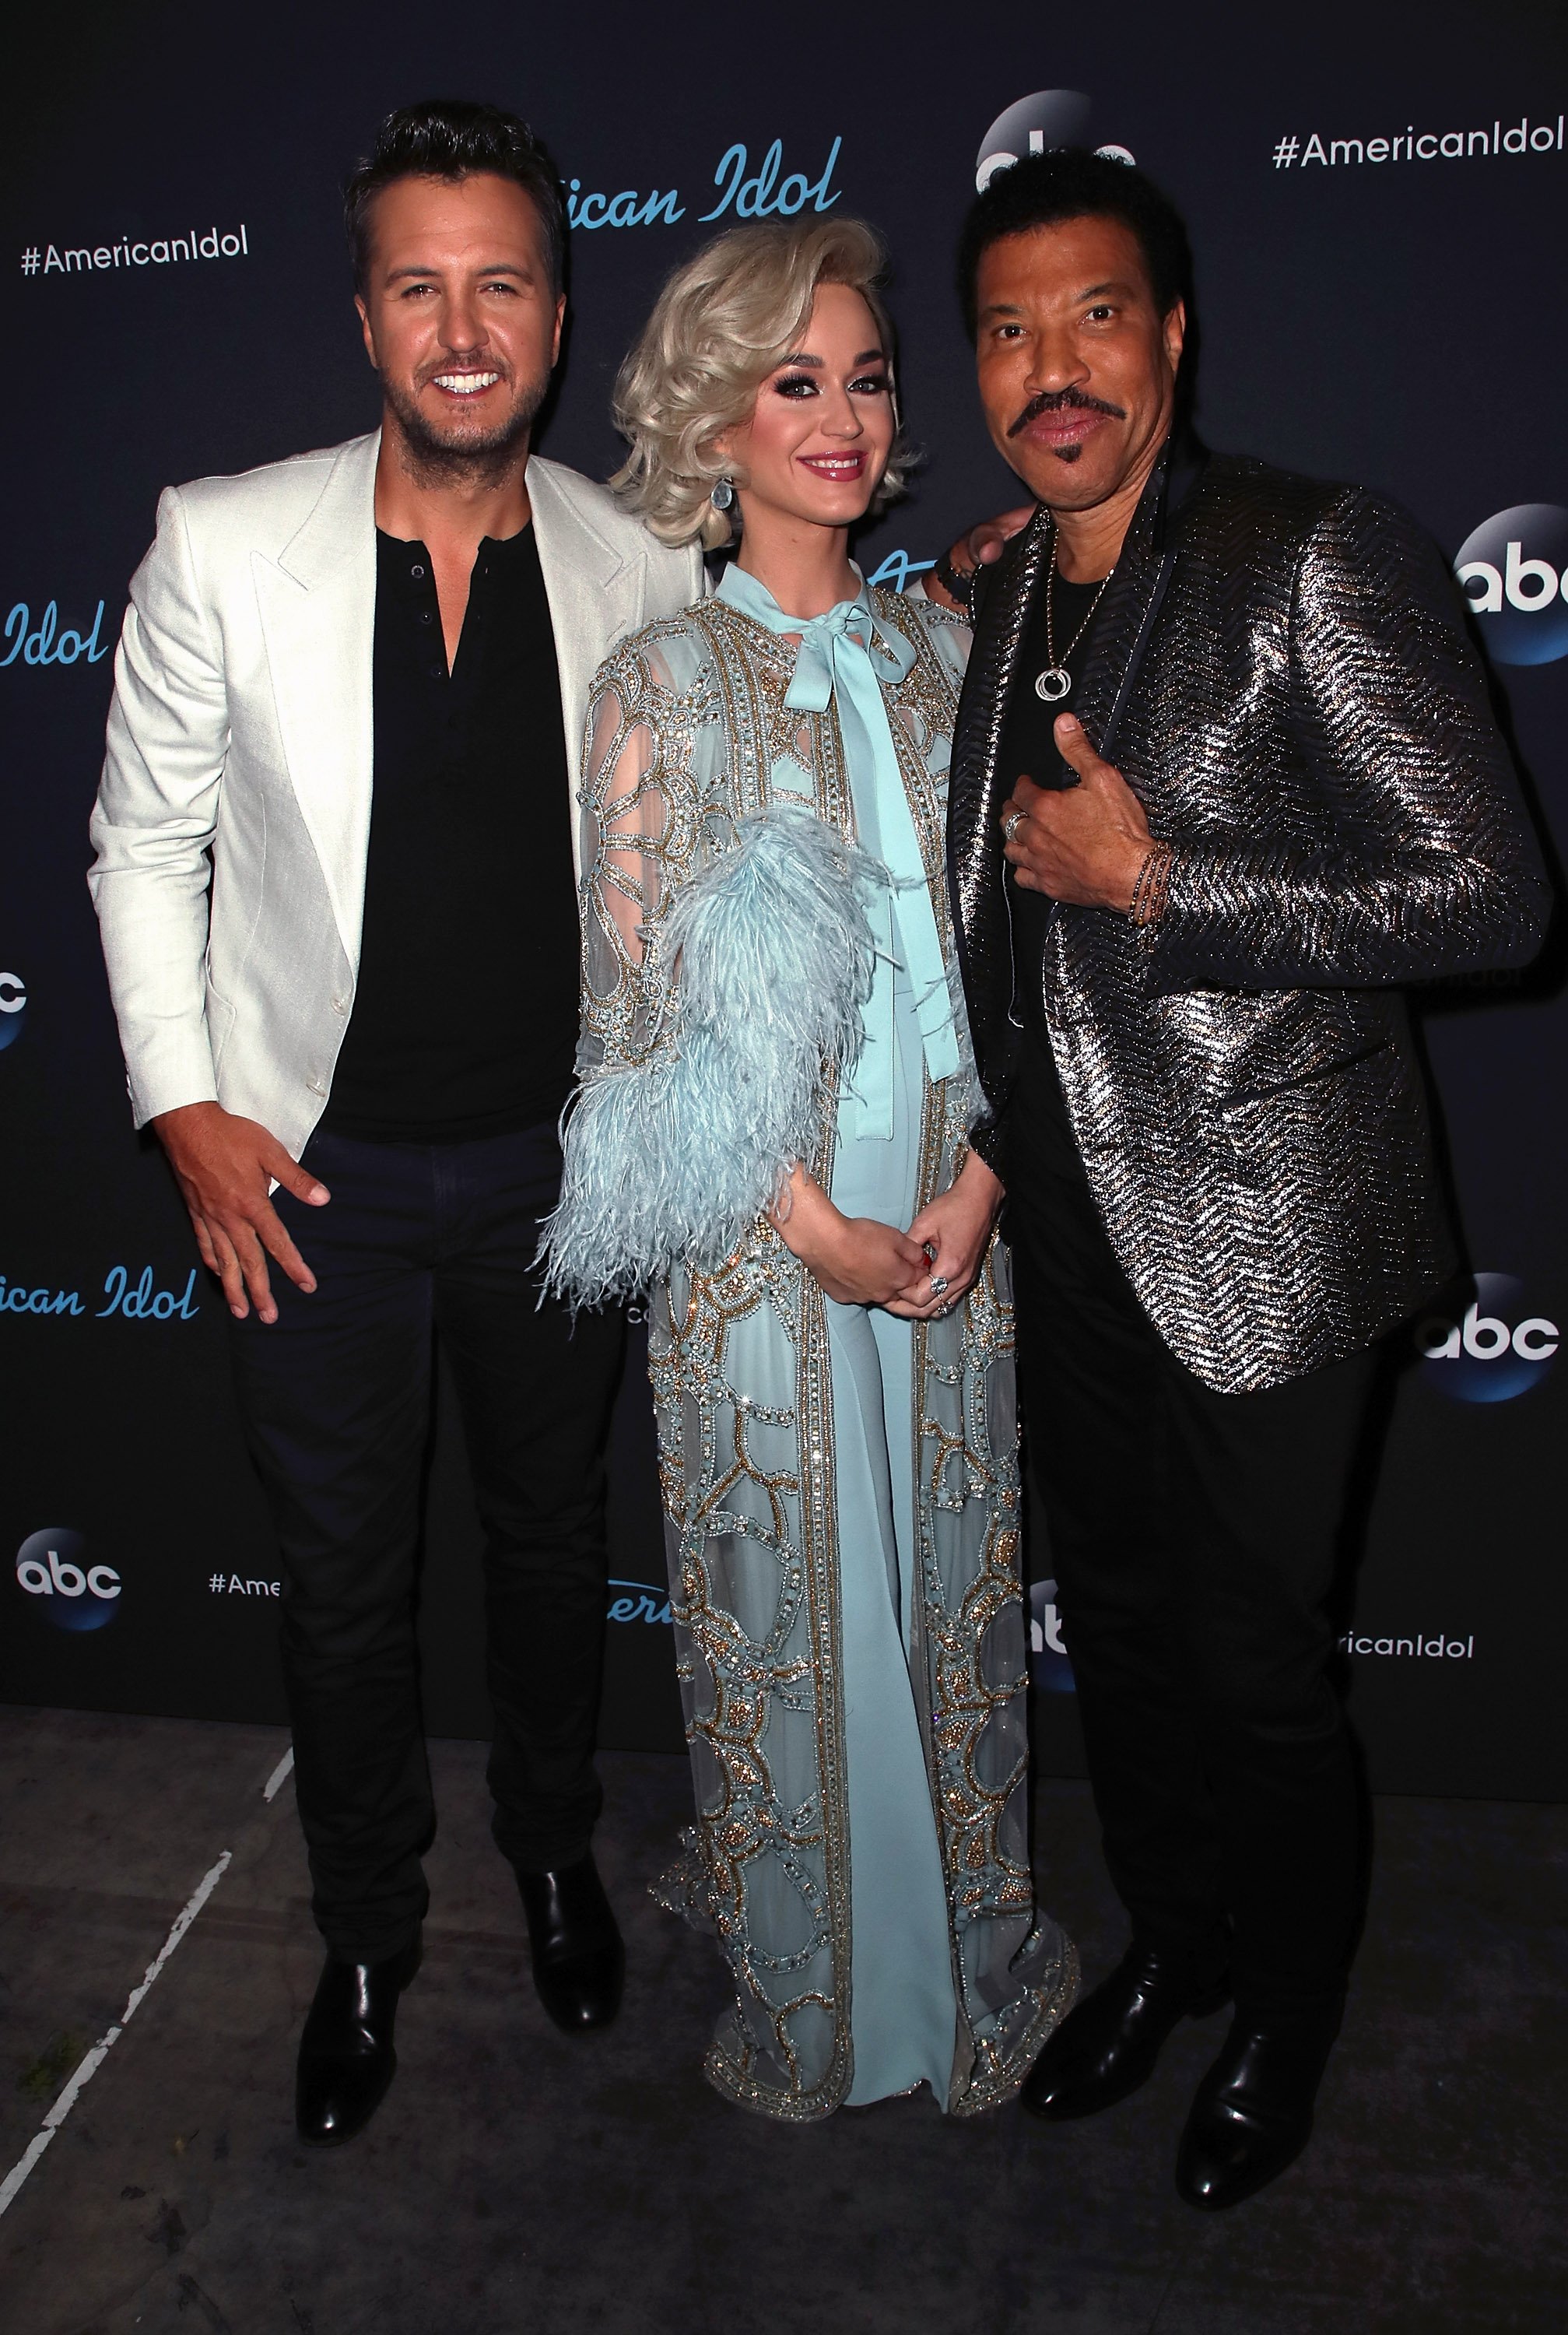 Luke Bryan, Katy Perry and Lionel Richie attend ABC's "American Idol" on May 20, 2018, in Los Angeles, California. | Source: Getty Images.